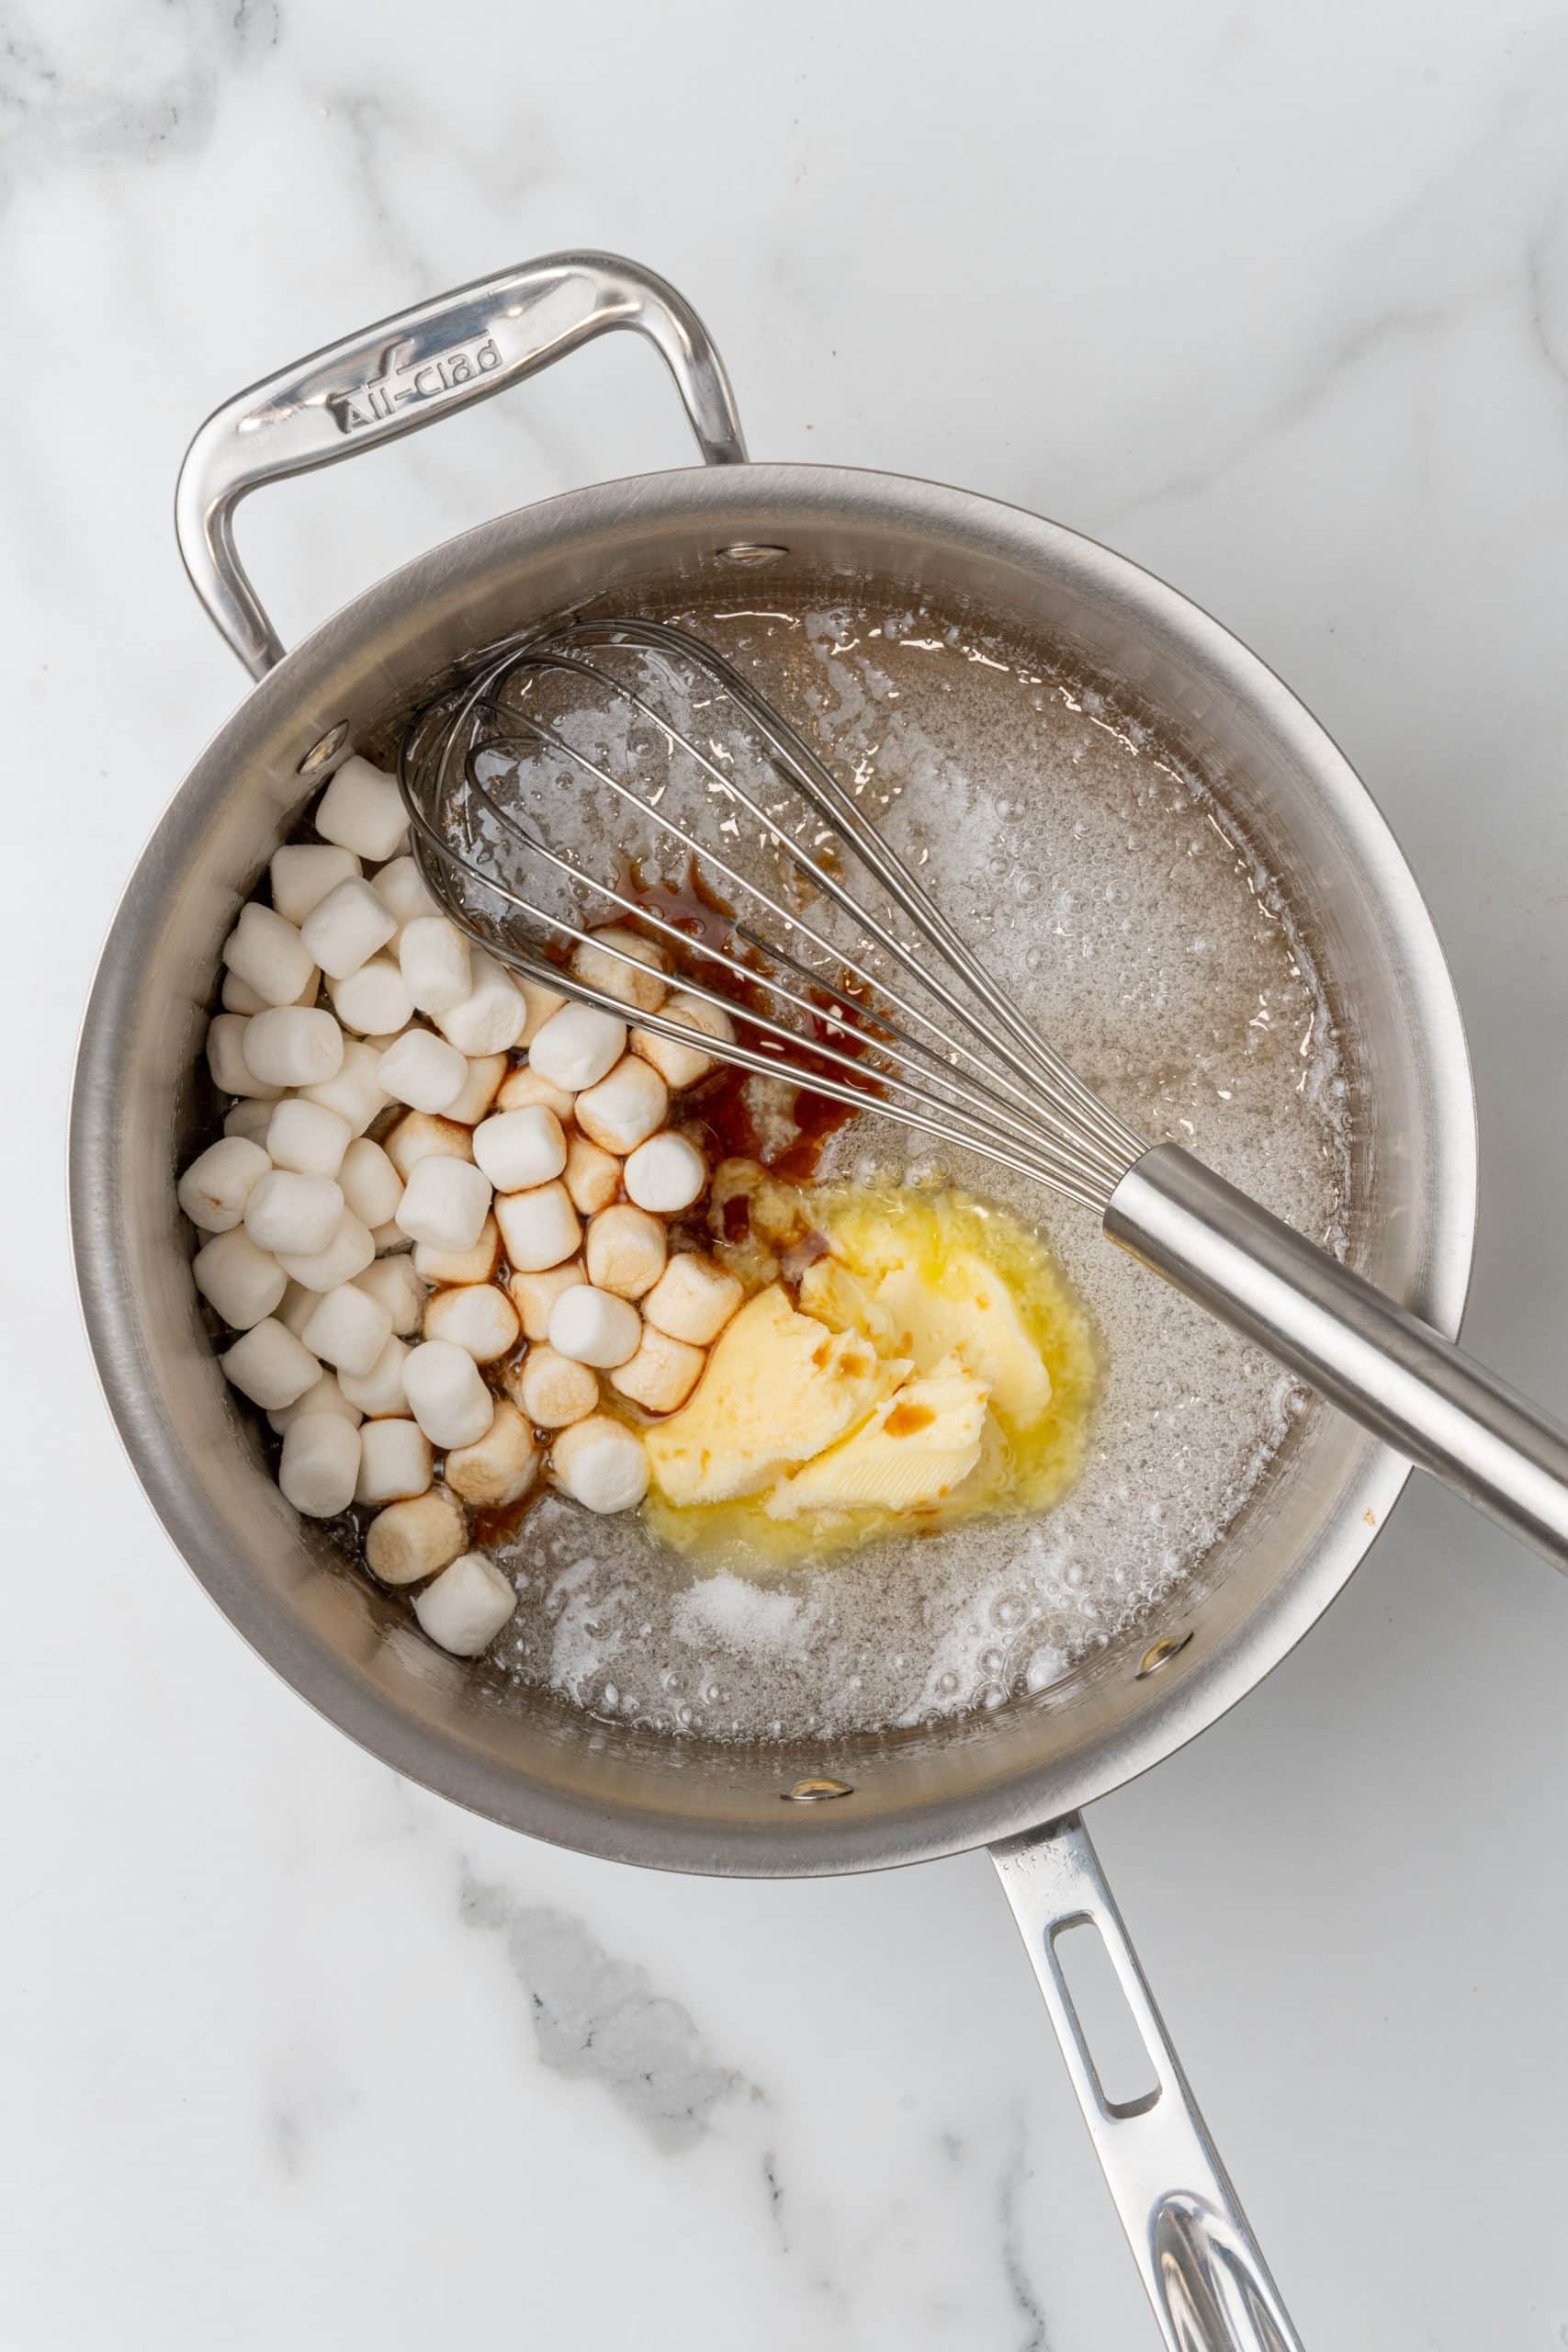 marshmallow syrup ingredients in a silver sauce pan with a wire whisk